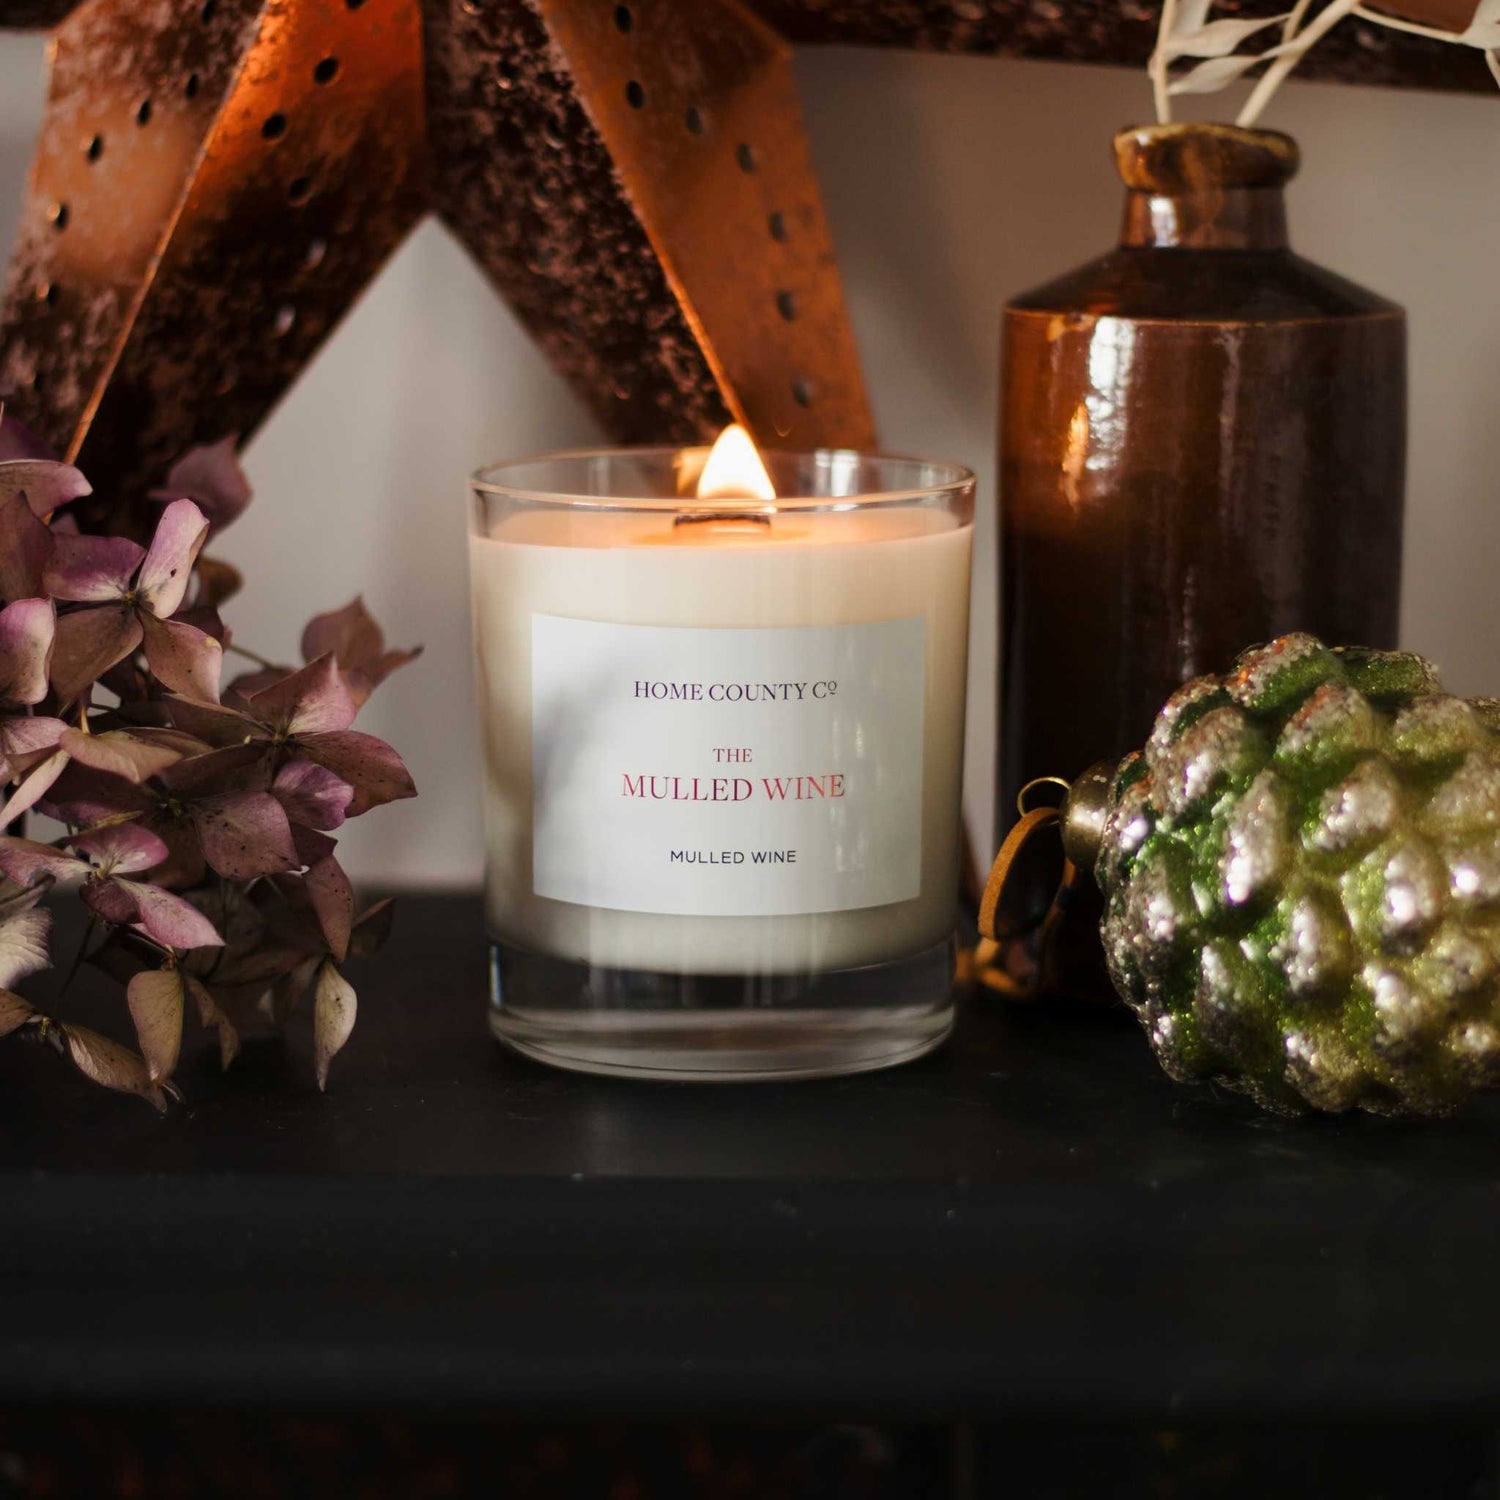 Mulled Wine scented candle from the Home County Co. is shown lit